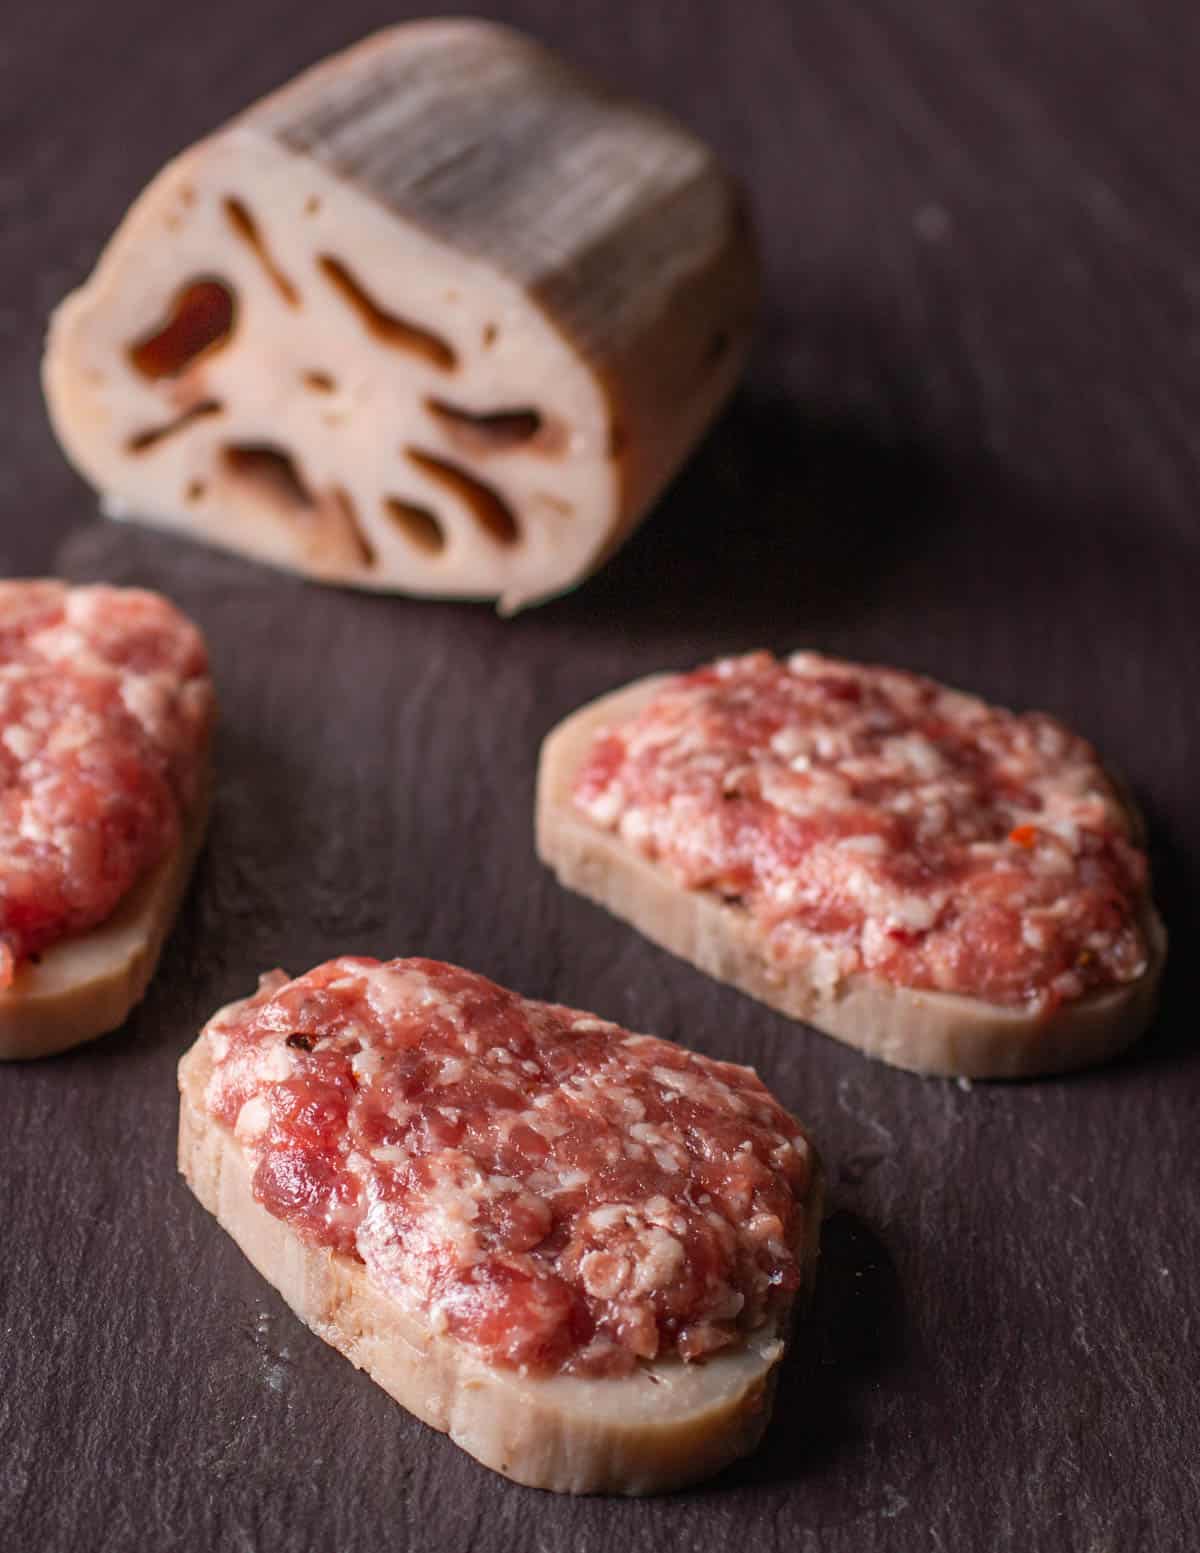 lotus root sliced and stuffed with sausage 